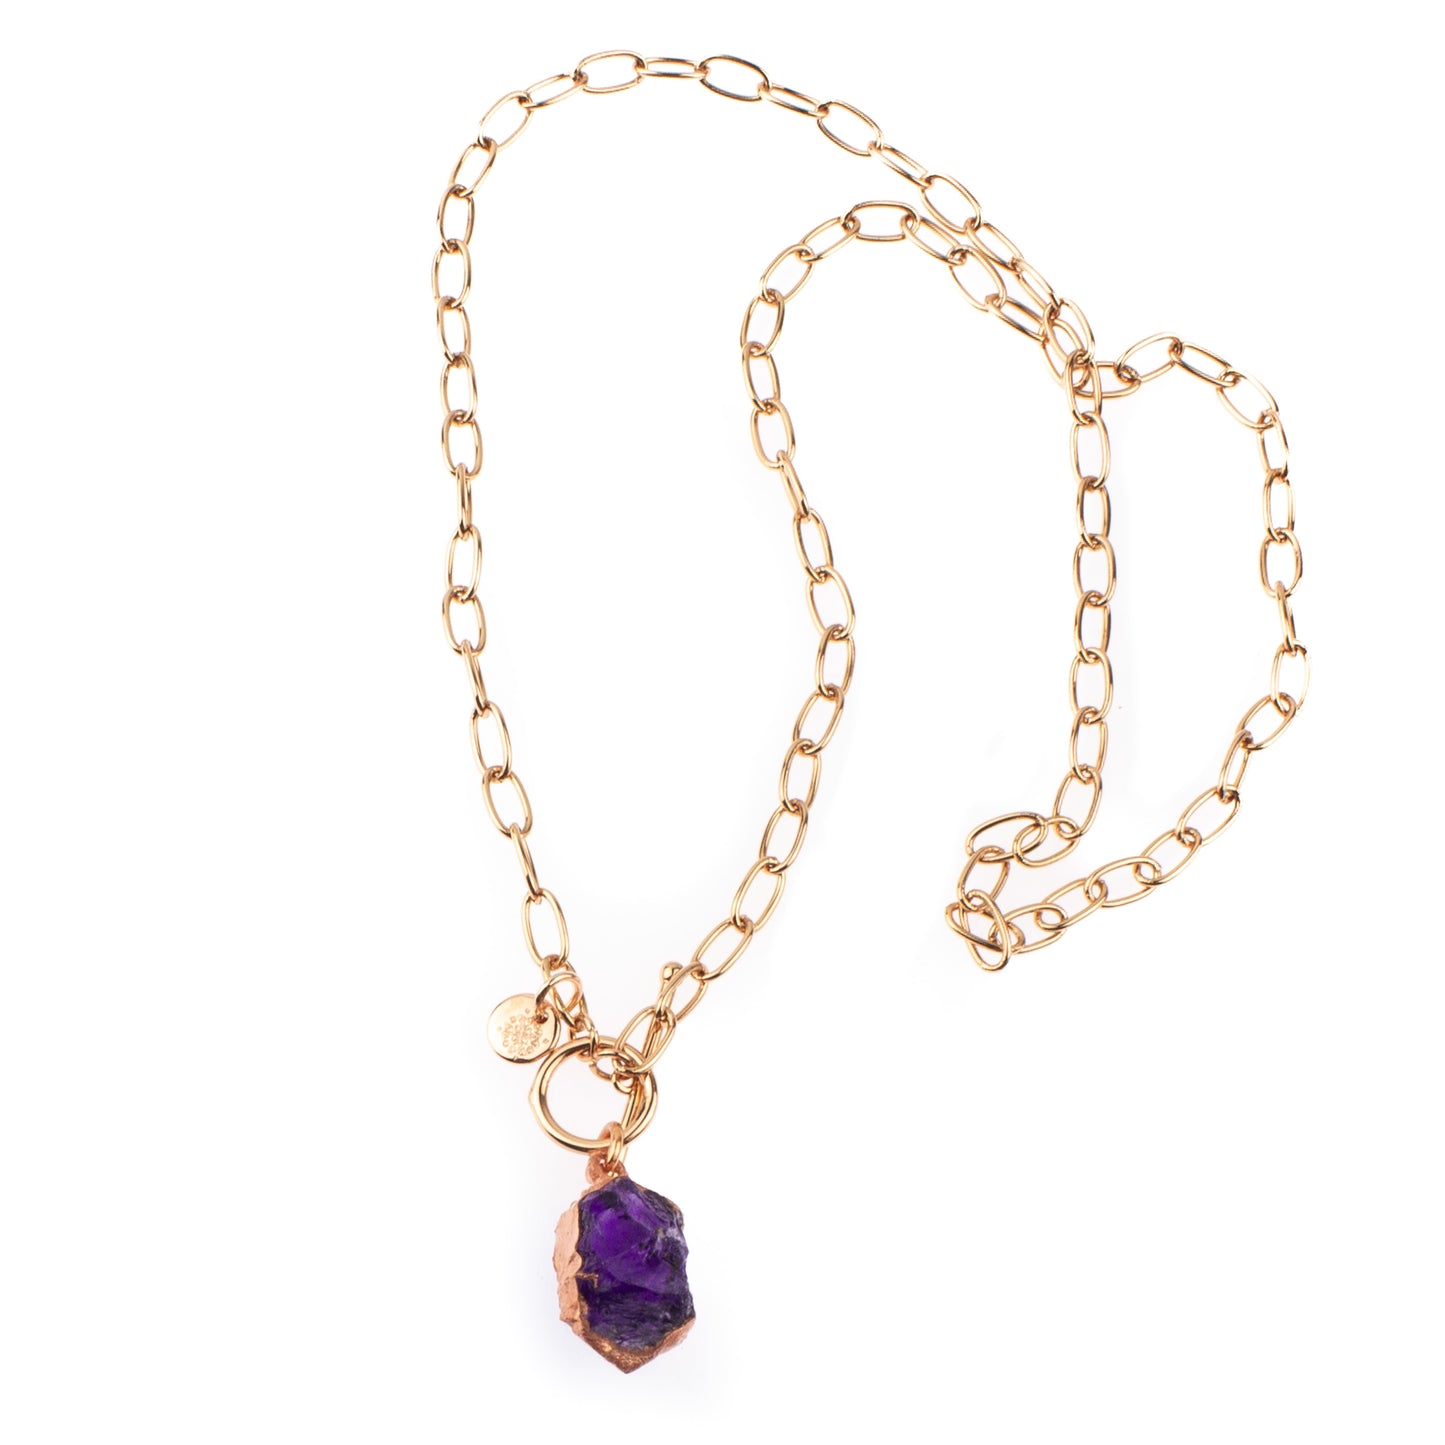 Large Amethyst Toggle Clasp Necklace